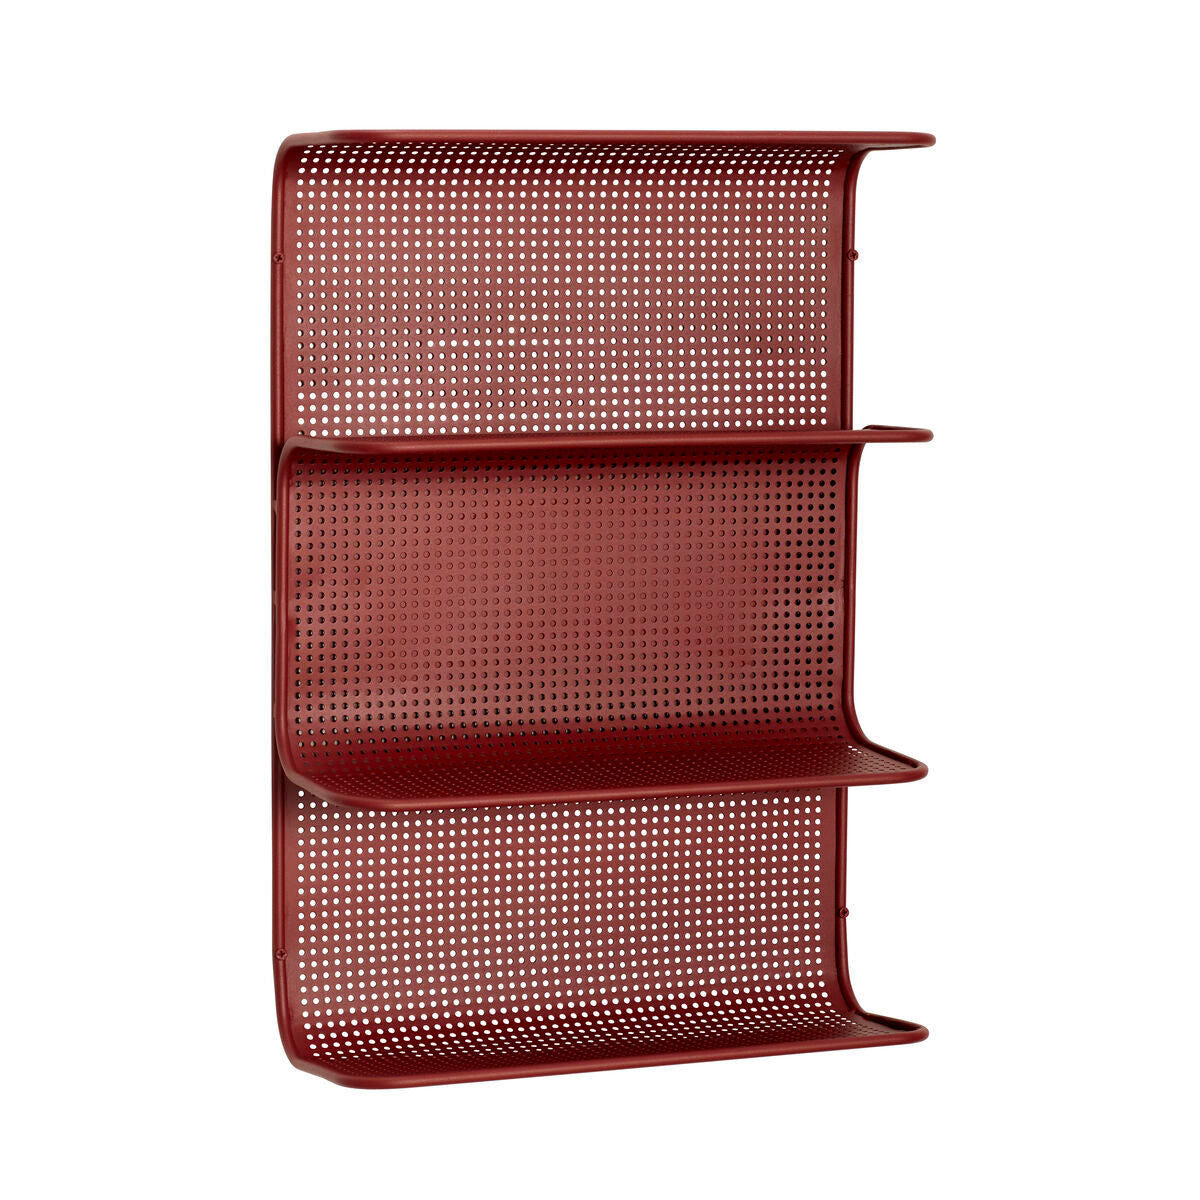 Grid is a unique and very original wall shelf. It was made of burgundy metal, making it very solid and durable. It has four shelves on which all favorite items will fit. Thanks to its subtlety and capacity, it will be found in many rooms. It can be hung as an organizer in the hall, a place for cosmetics in the bathroom or in any space where order is needed.